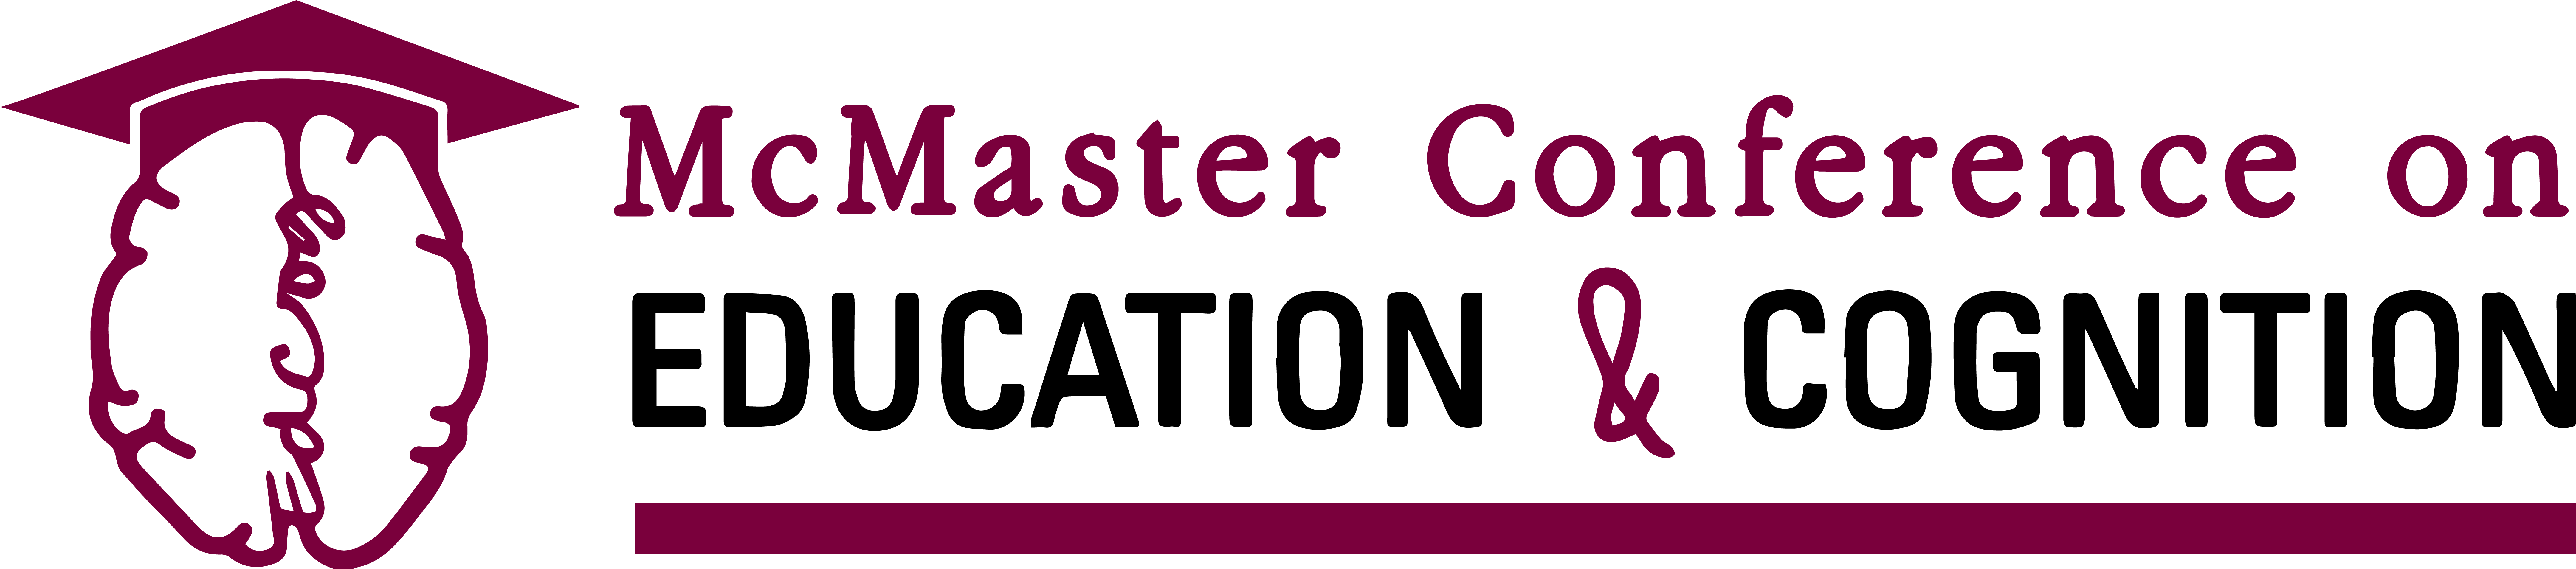 Logo for McMaster Conference on Education & Cognition